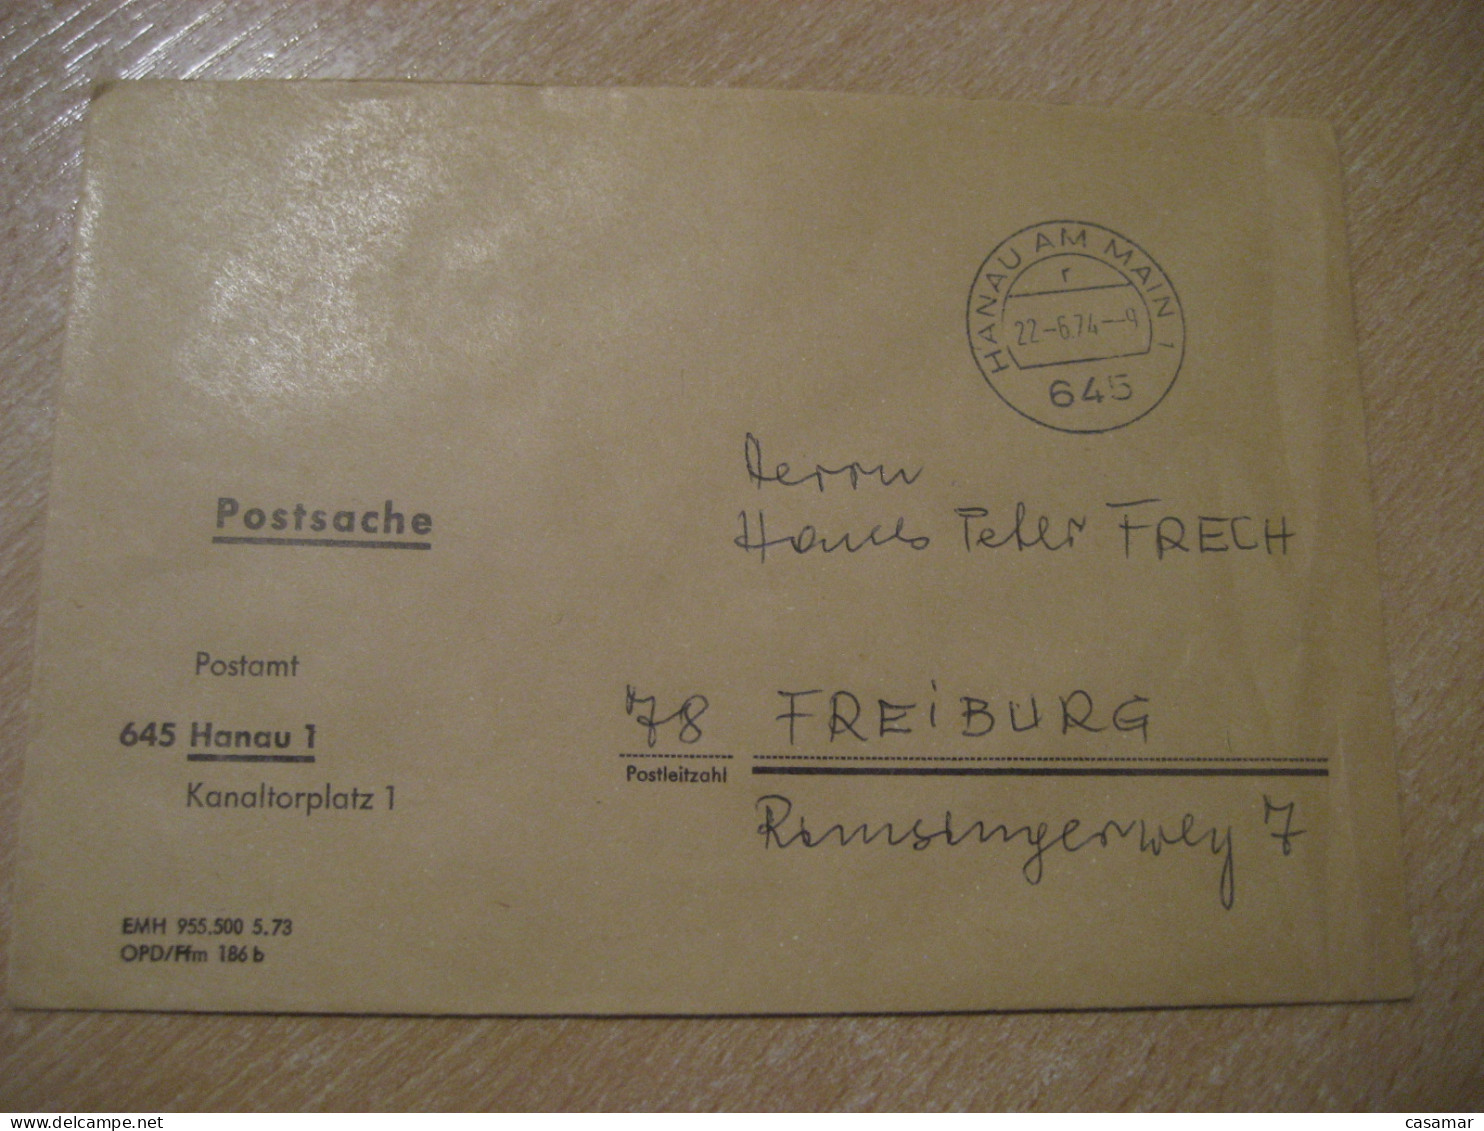 HANAU AM MAIN 1974 To Freiburg Postage Paid Cancel Cover GERMANY - Covers & Documents